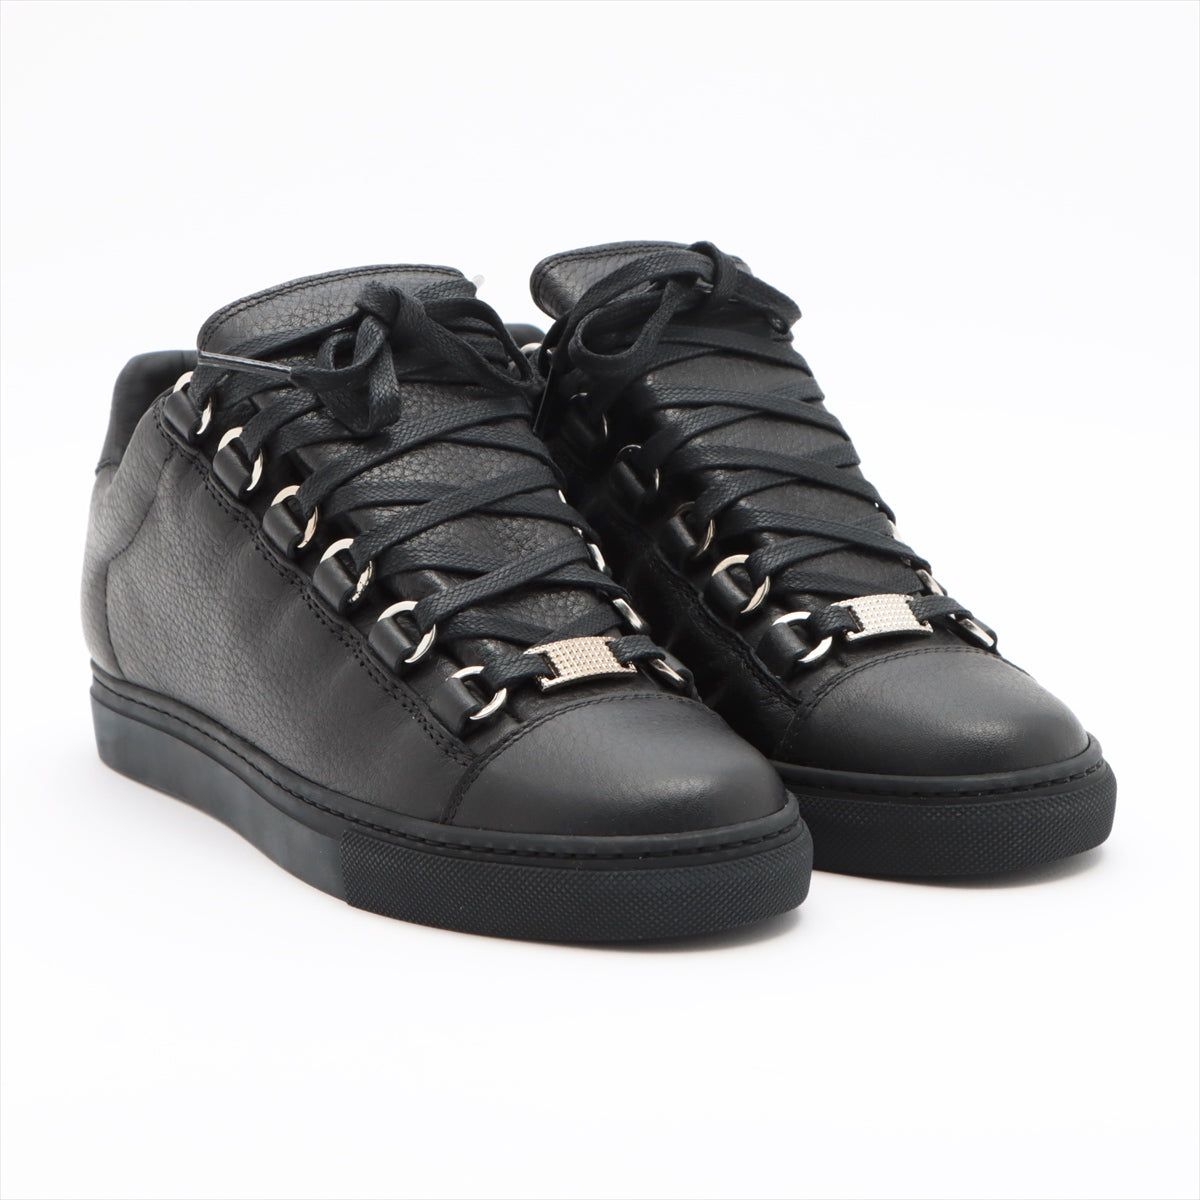 Balenciaga Leather Sneakers 35 Ladies' Black 433295 Box Included